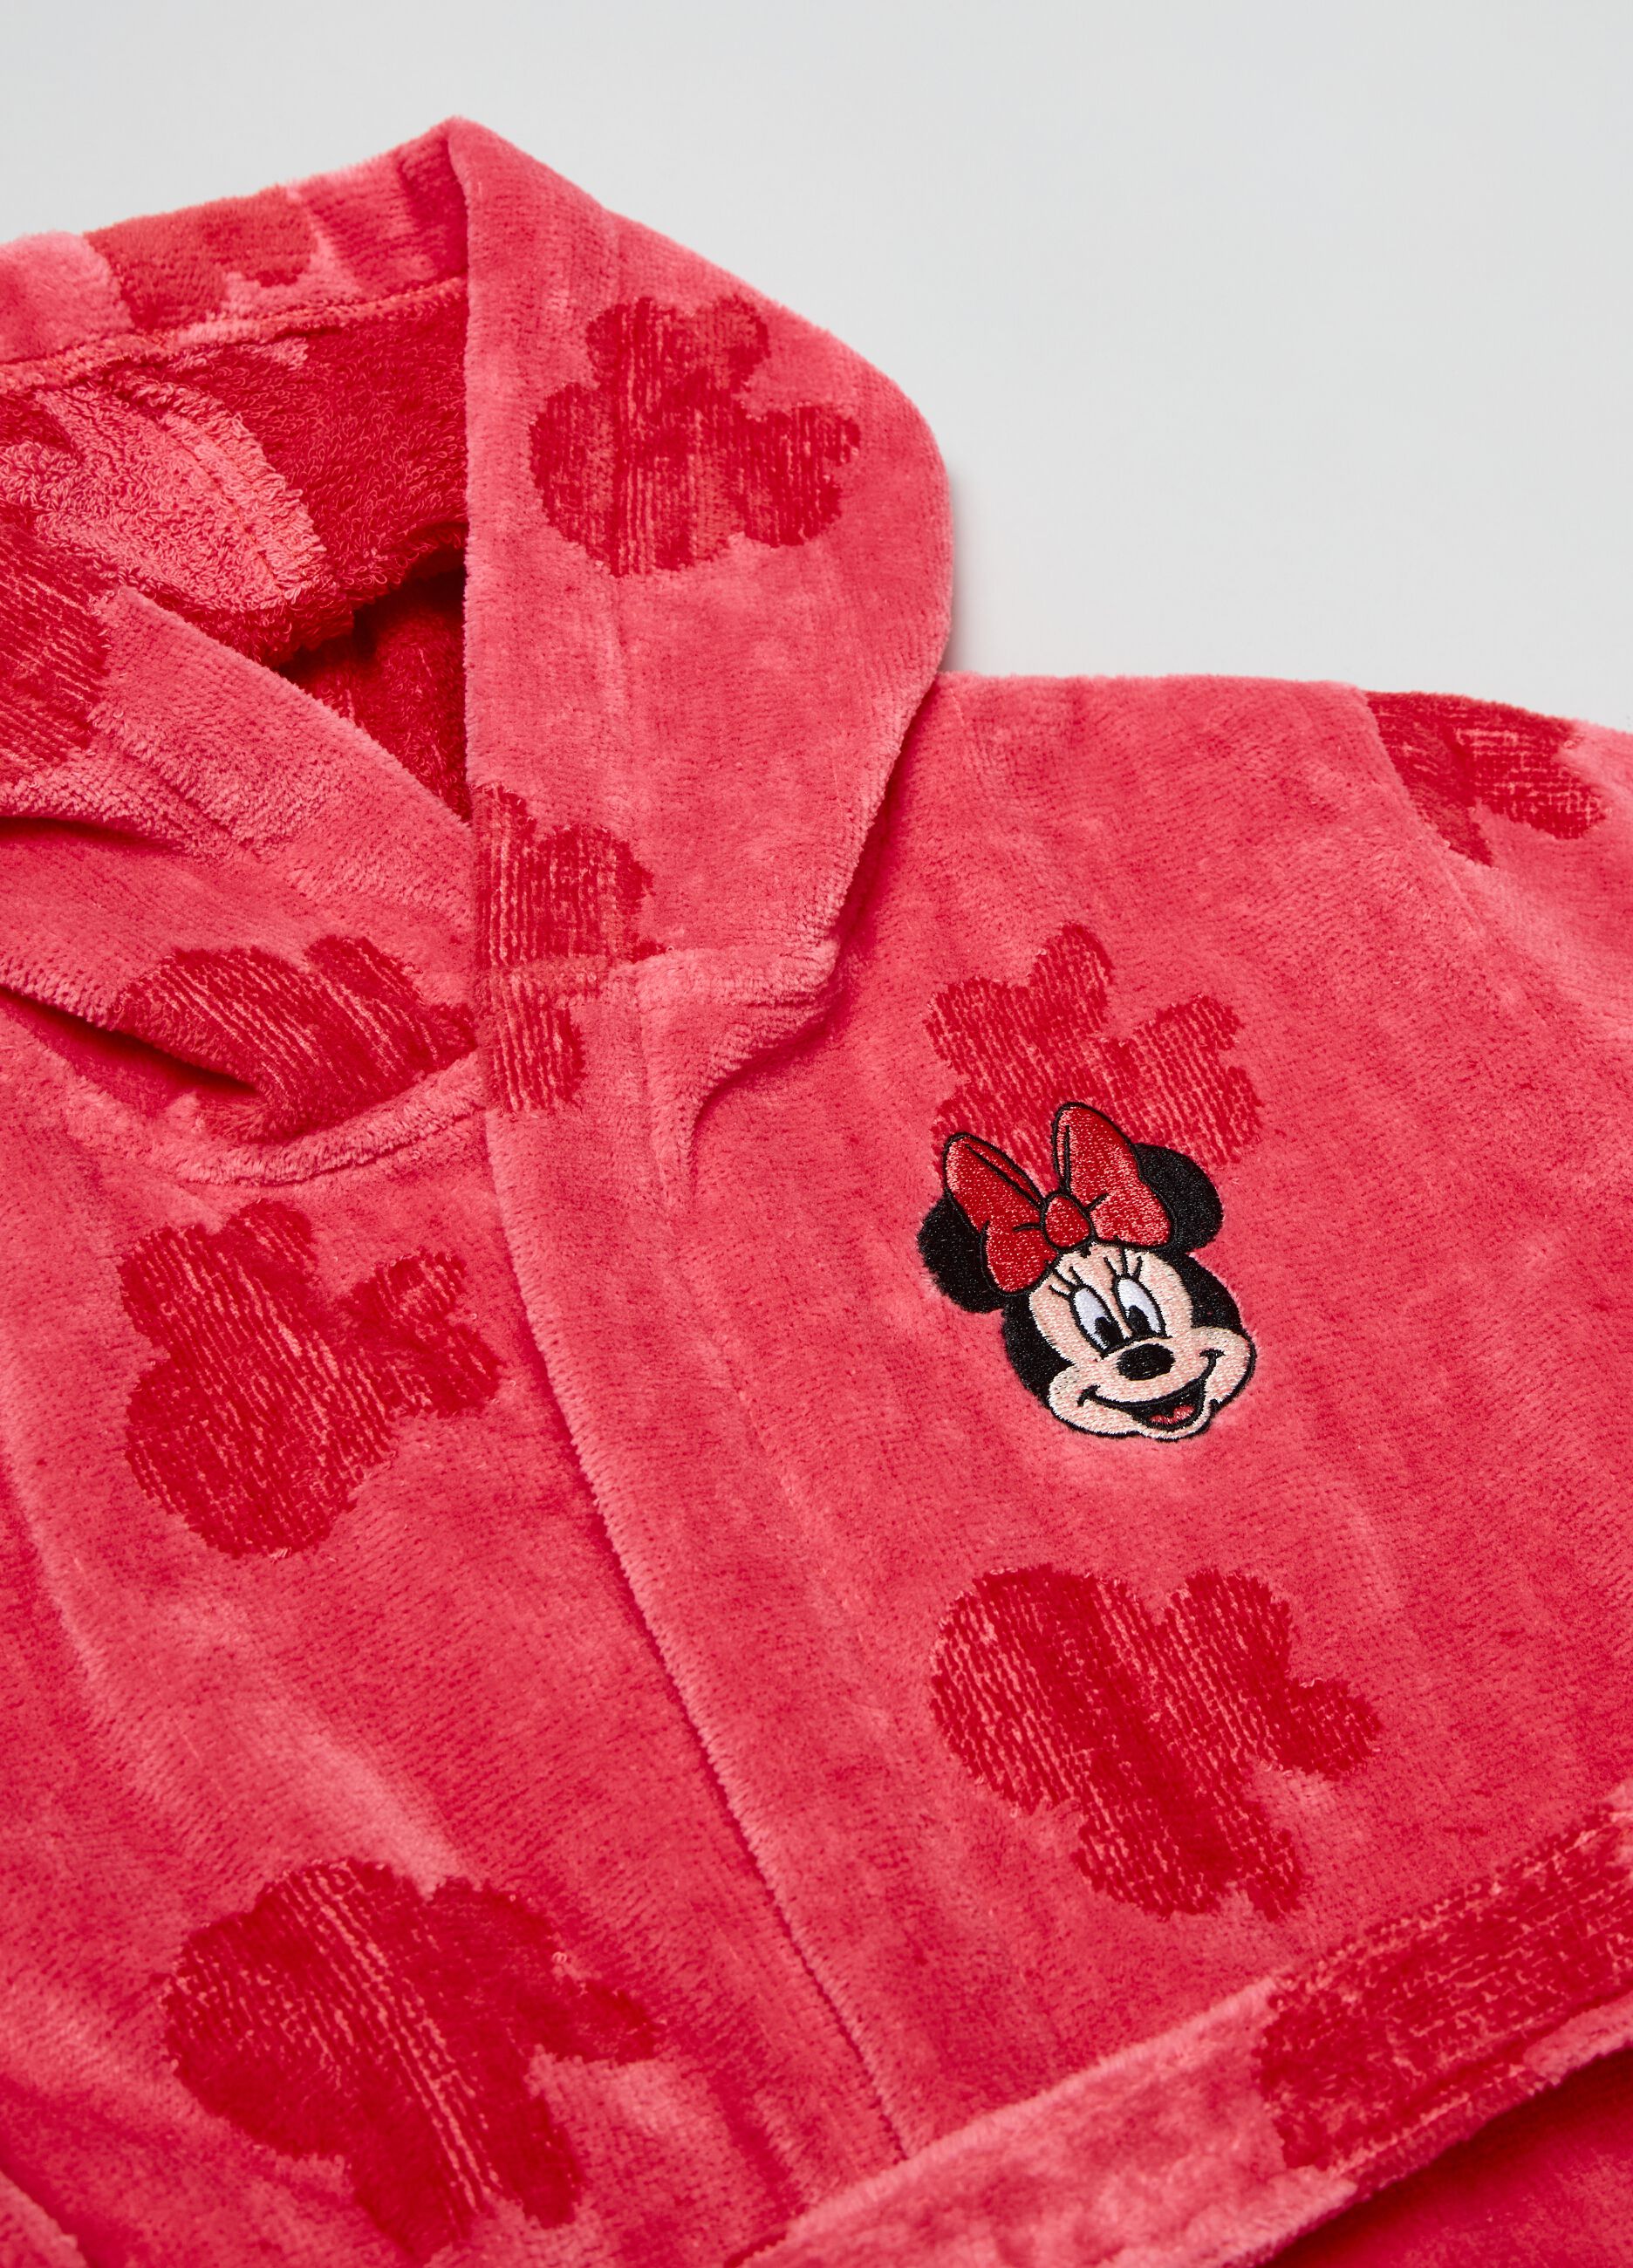 Bathrobe with Disney Baby Minnie Mouse embroidery